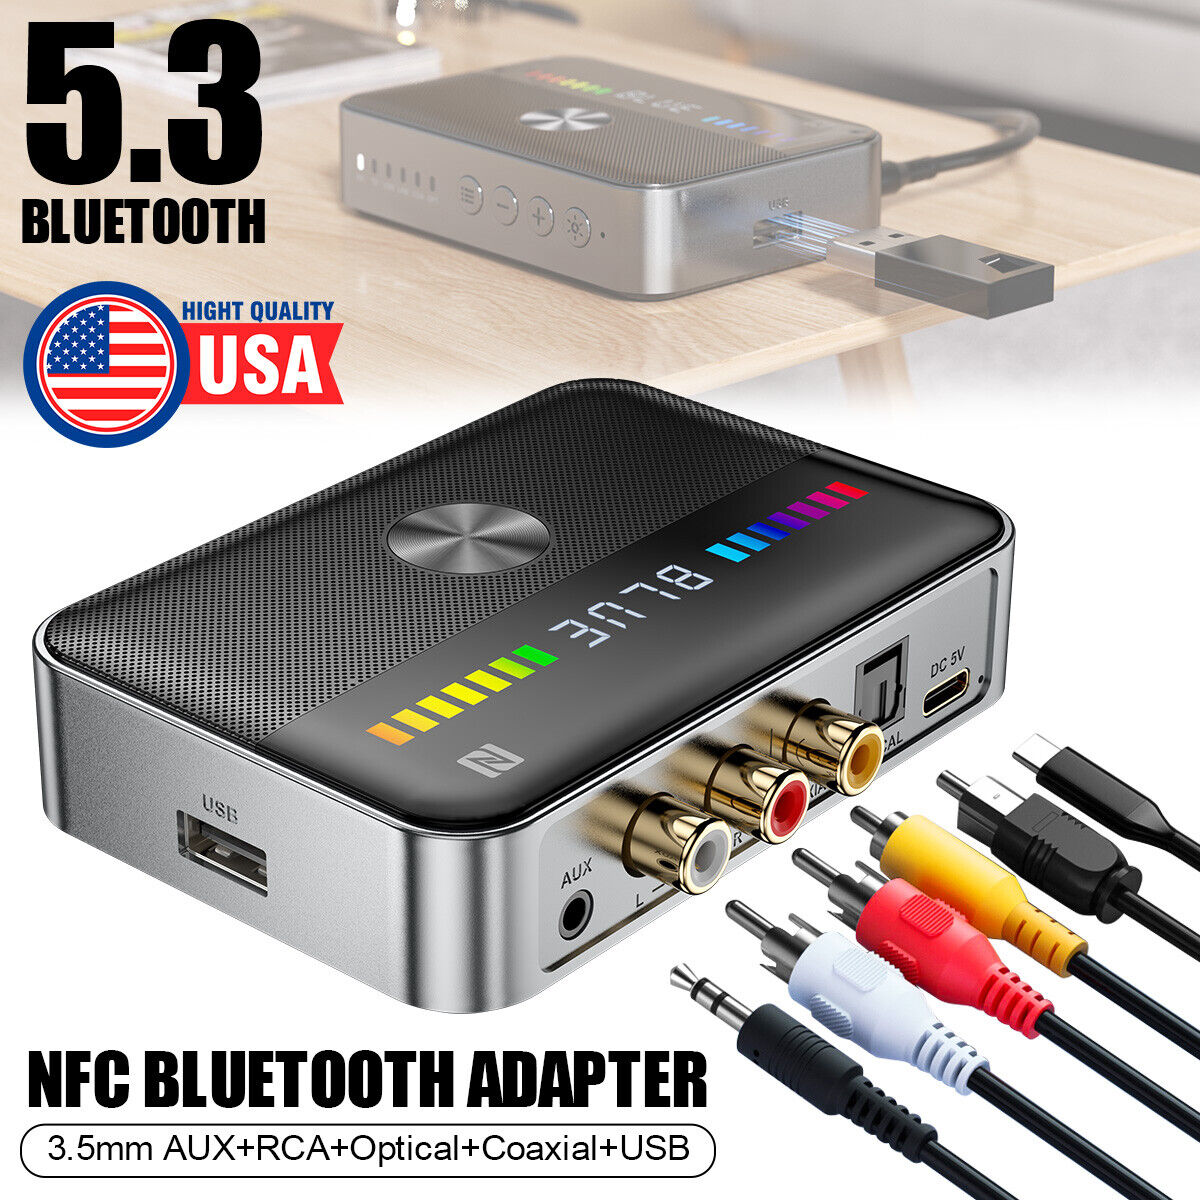 Bluetooth 5.3 Transmitter Receiver Adapter USB NFC 3.5mm AUX RCA Coaxial Optical